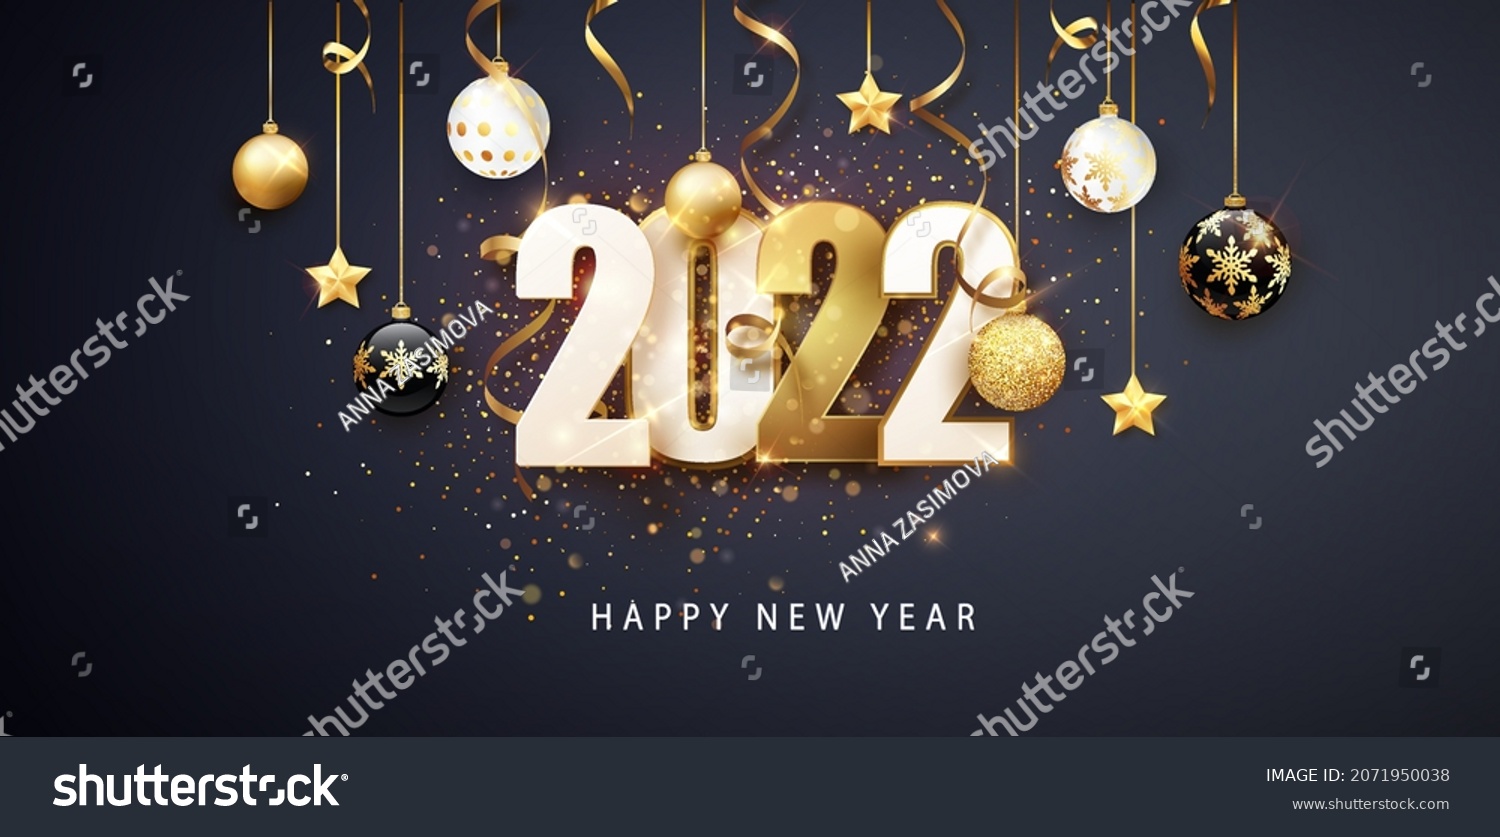 Happy new year 2022. Festive design with Christmas decorations, balls, streamer and garlands #2071950038